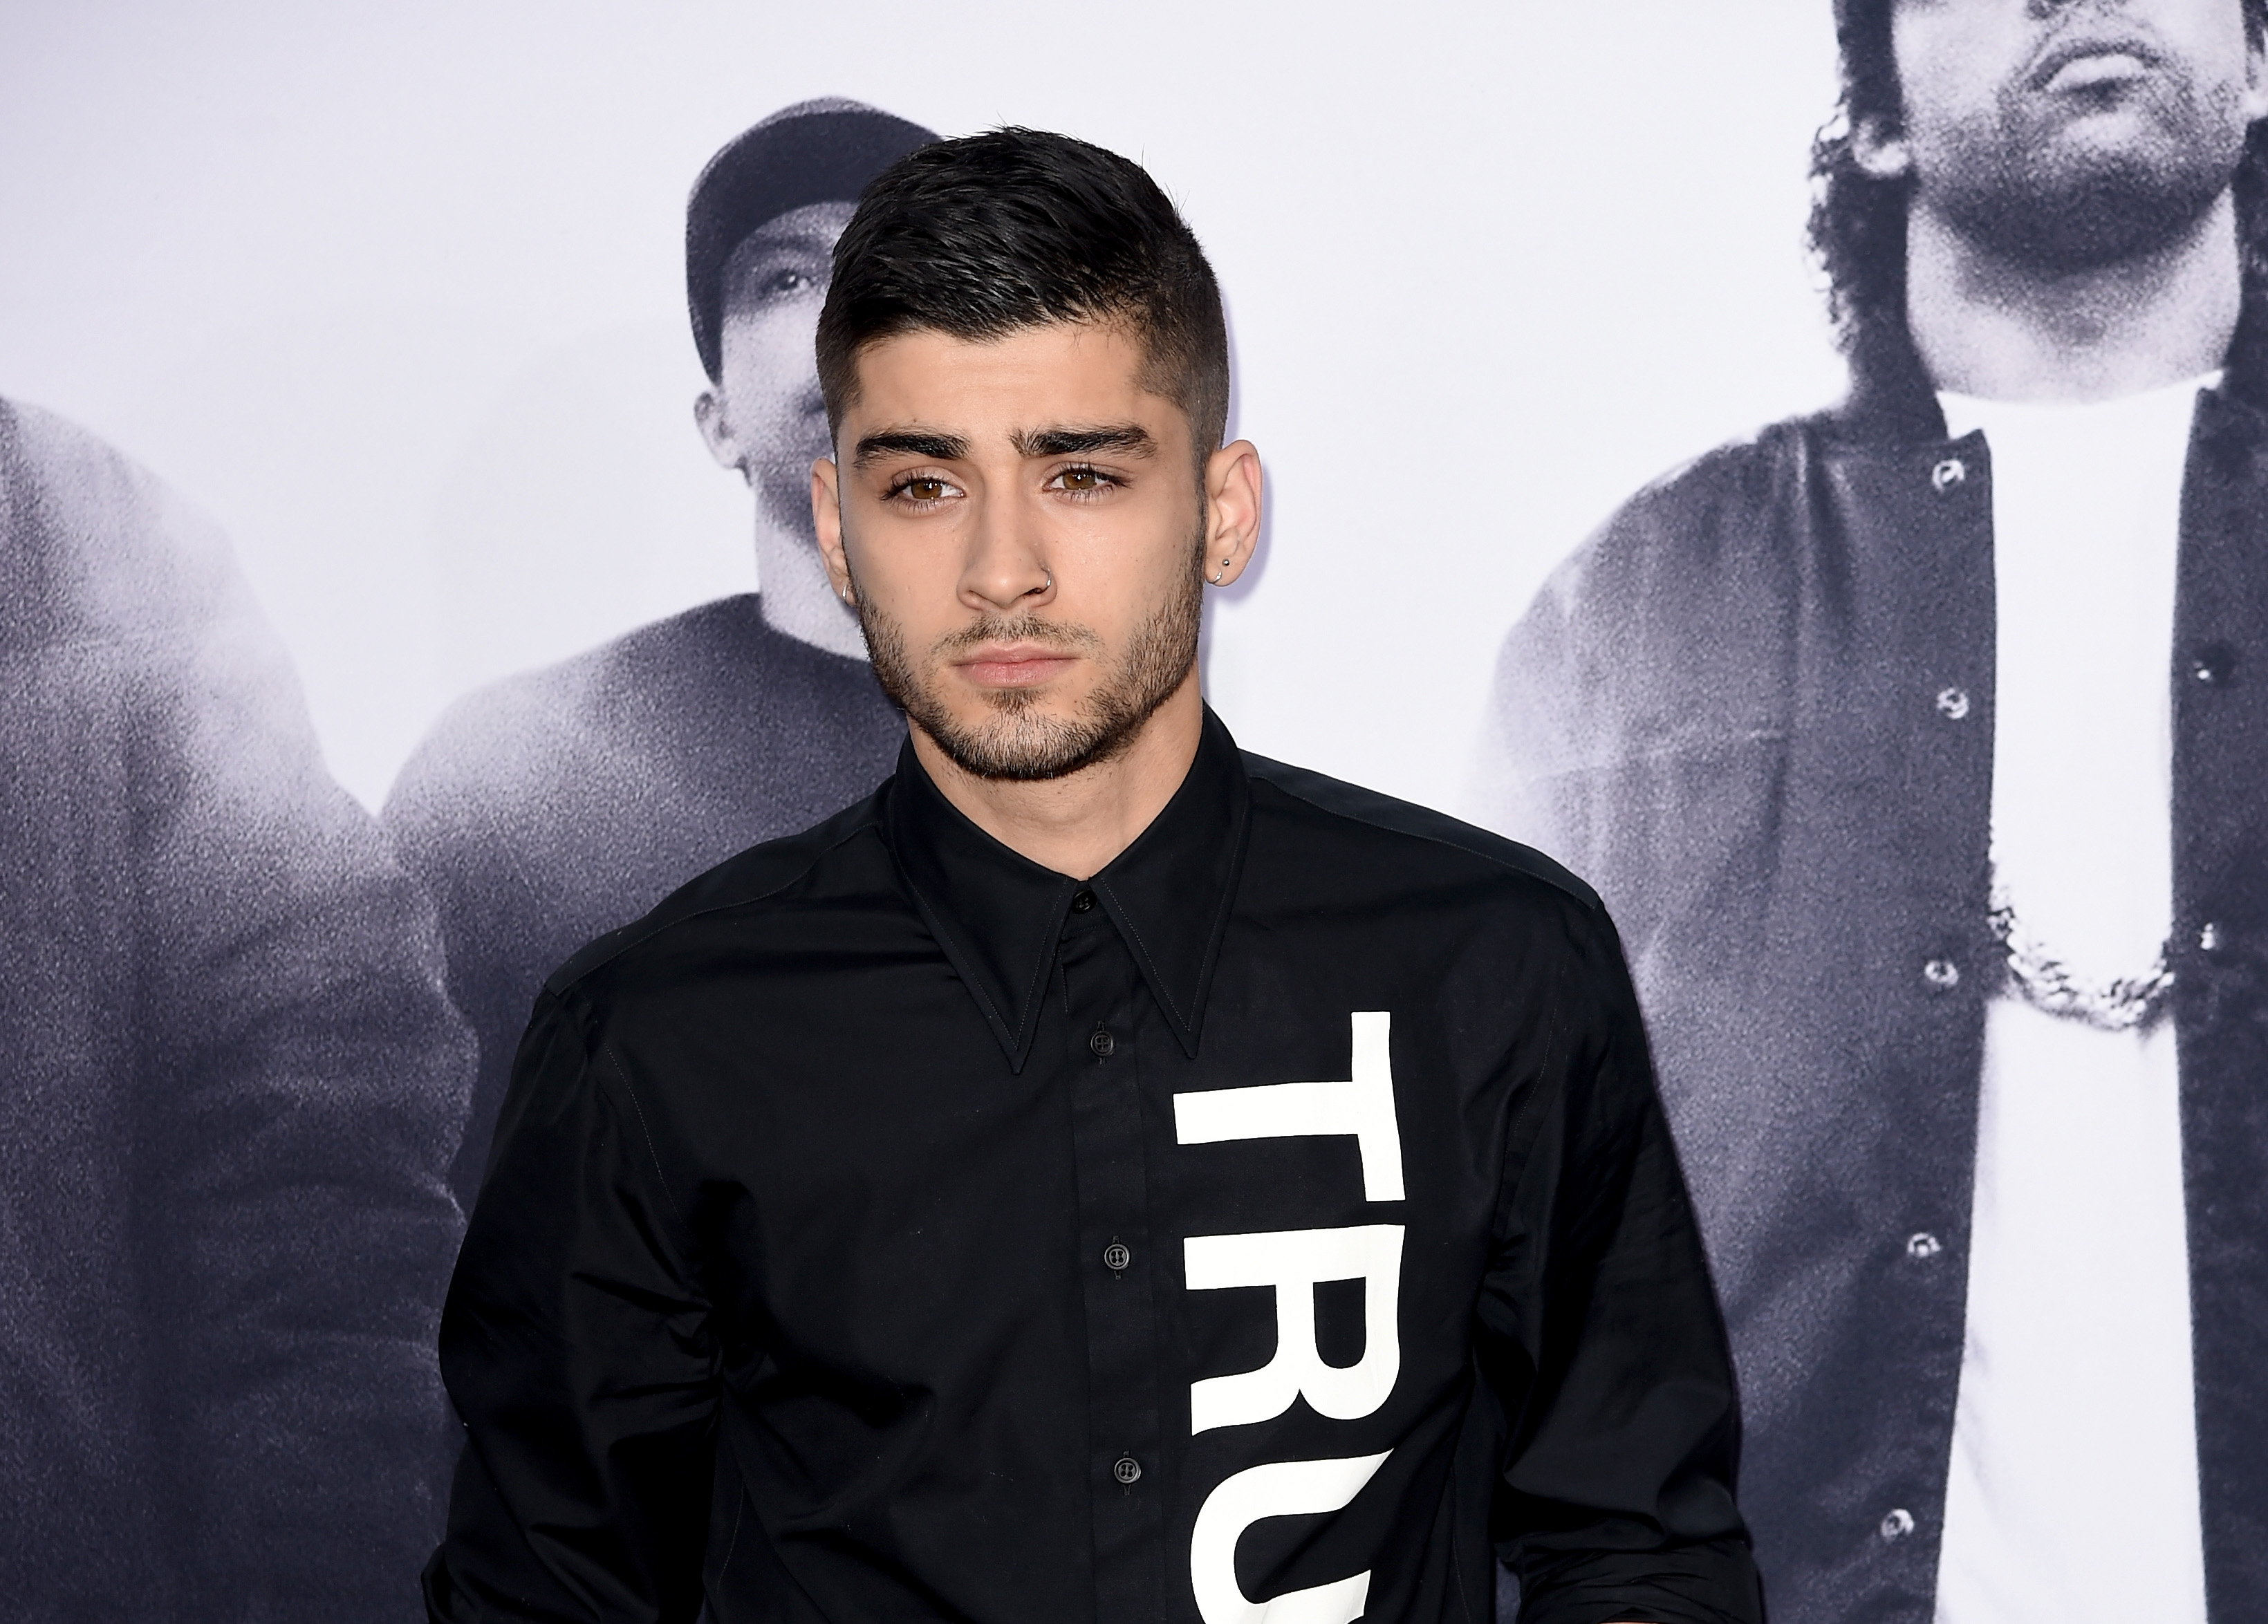 LOS ANGELES, CA - AUGUST 10: Singer Zayn Malik arrives at the premiere of Universal Pictures and Legendary Pictures' "Straight Outta Compton" at the Microsoft Theatre on August 10, 2015 in Los Angeles, California. (Photo by Kevin Winter/Getty Images)